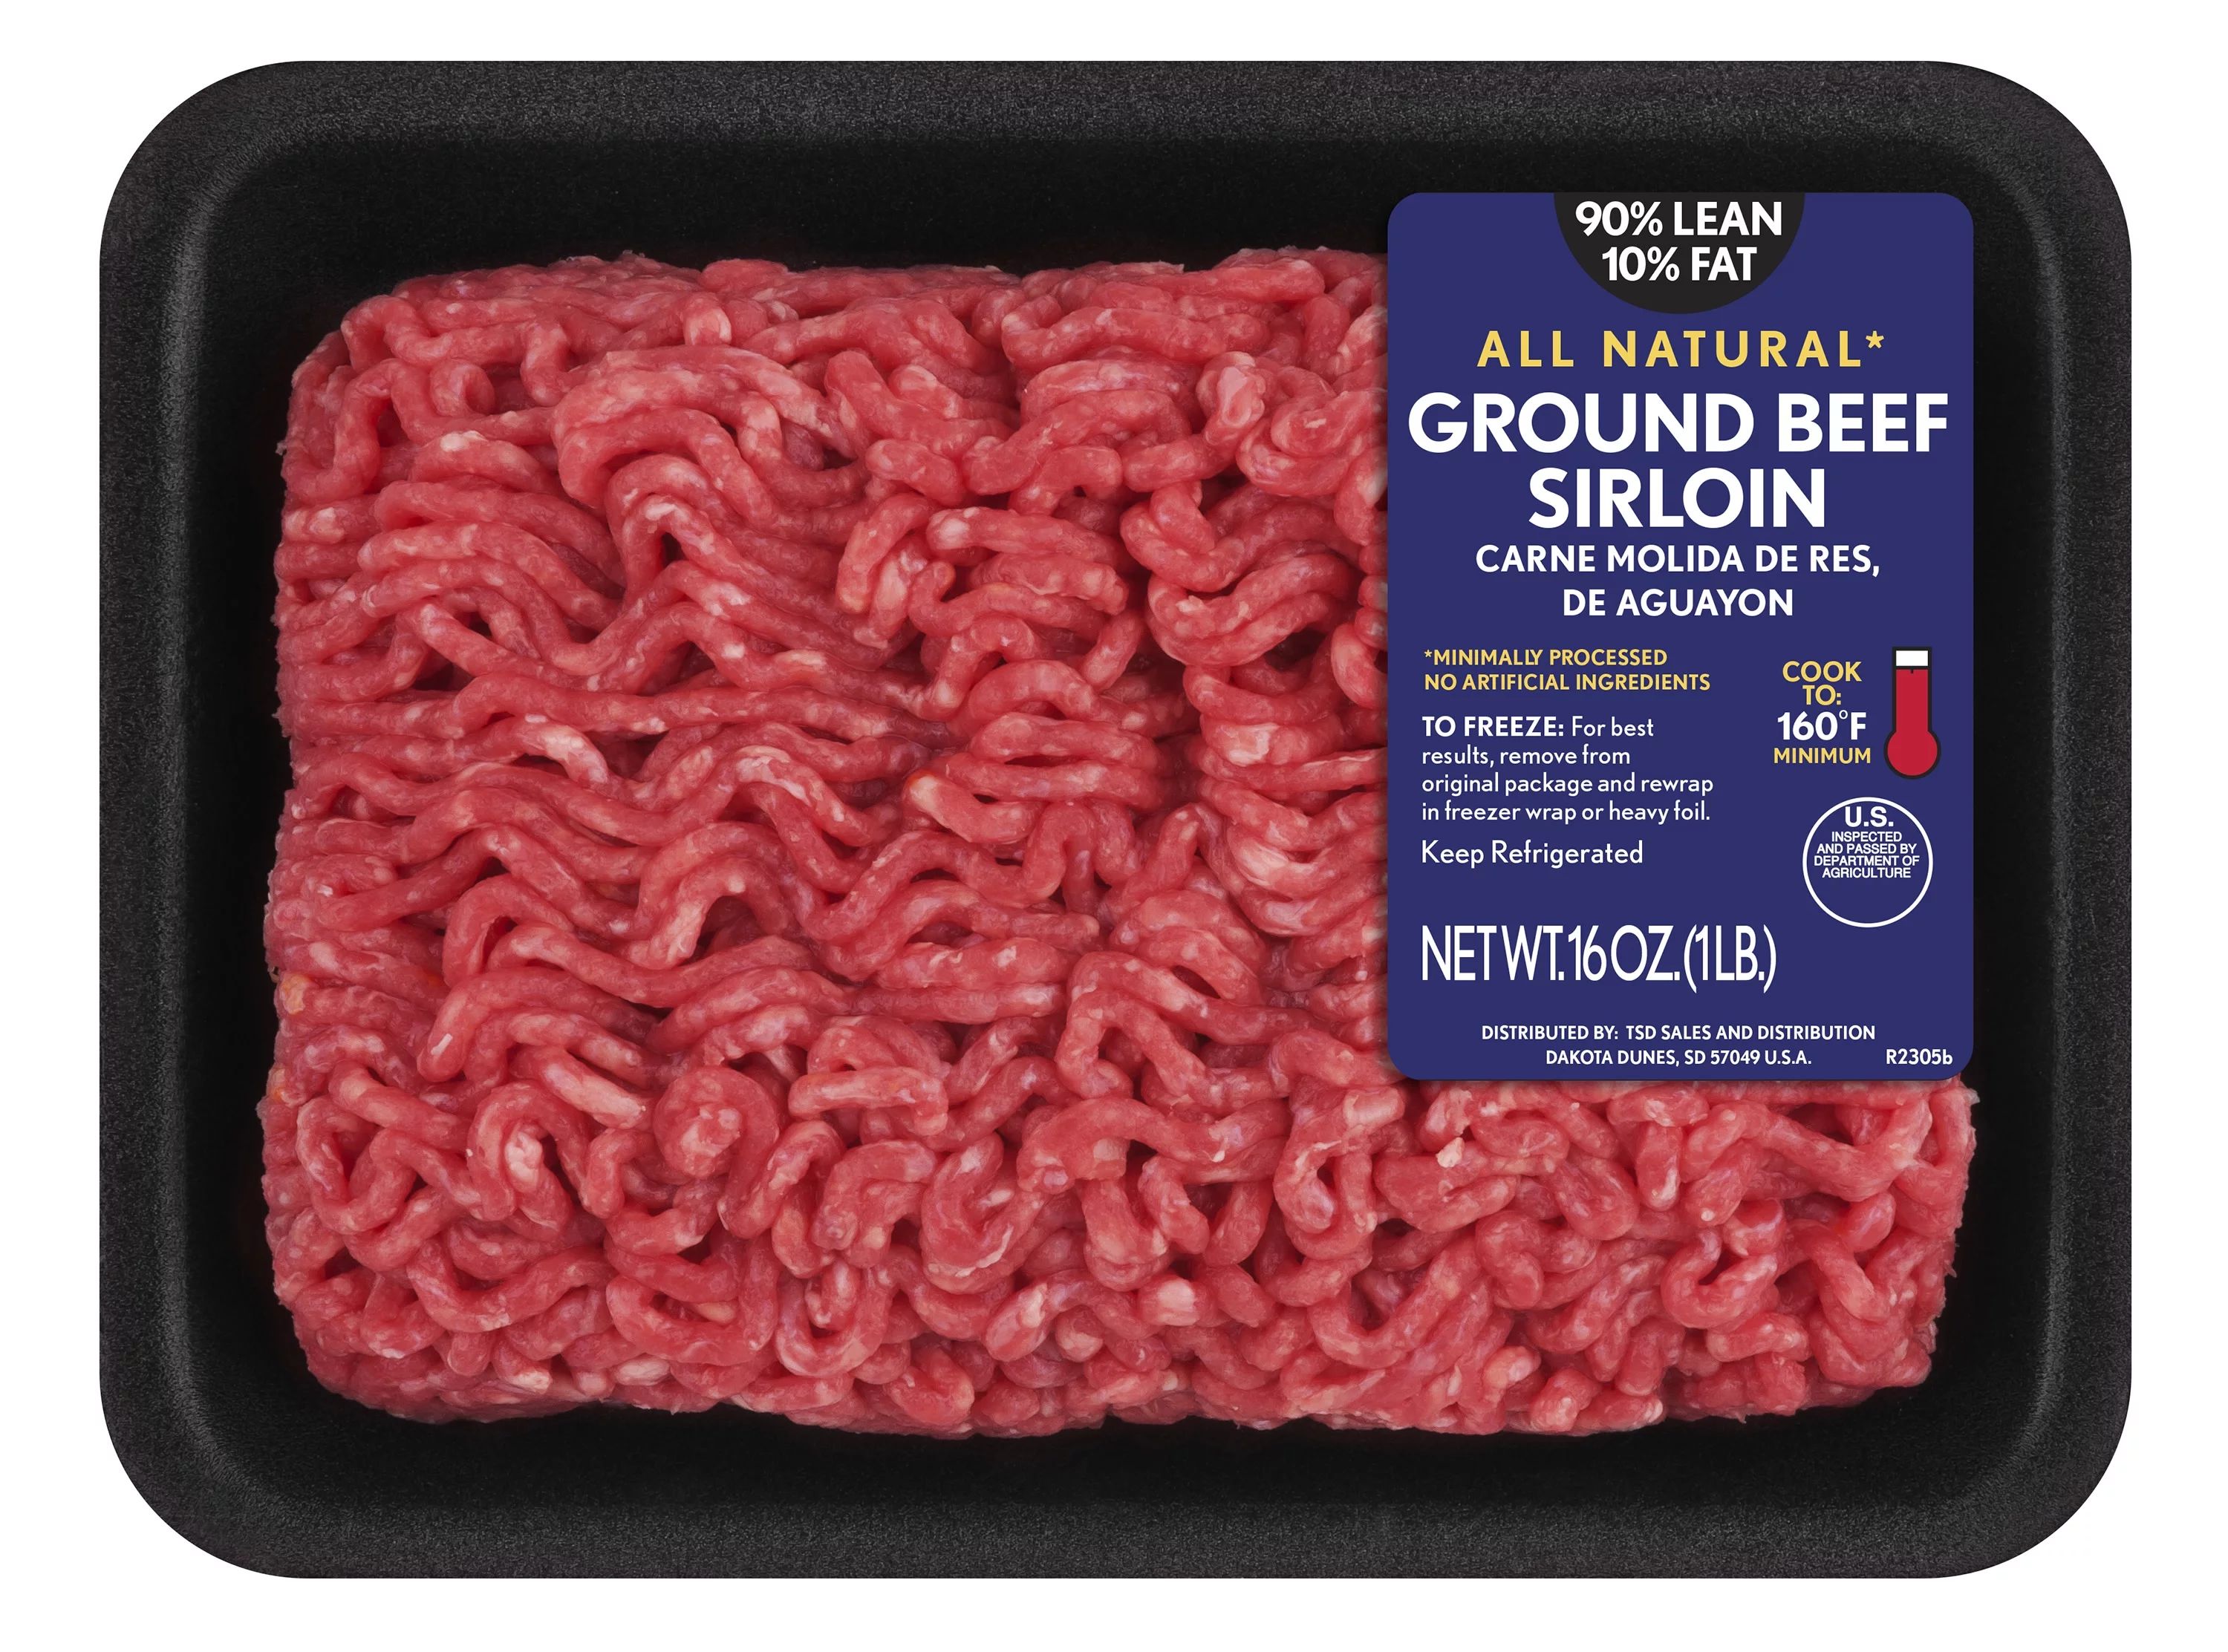 All Natural* 90% Lean/10% Fat Ground Beef Sirloin Tray, 1 lb | Walmart (US)